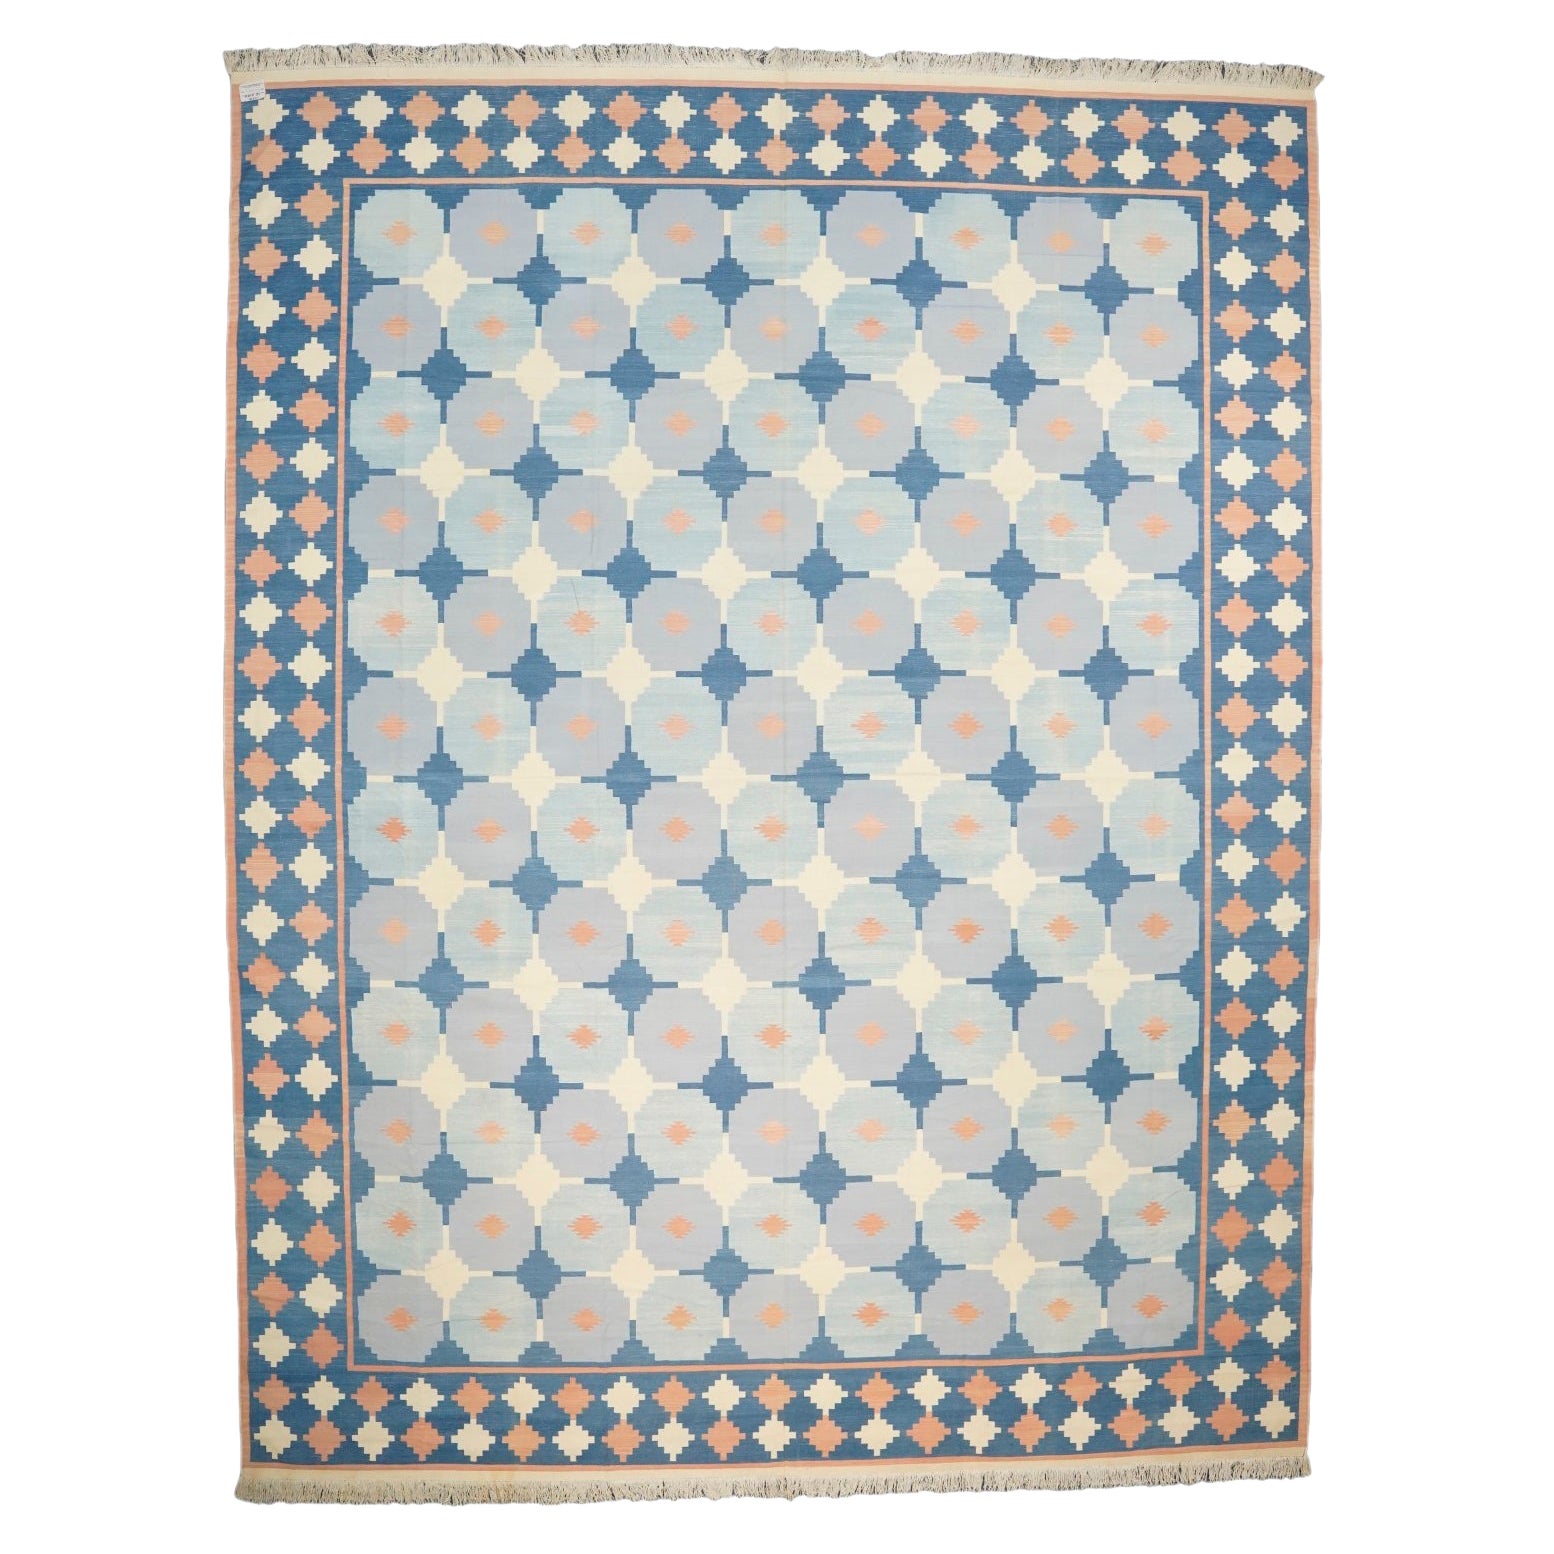 Vintage Dhurrie Rug in Blue and White Geometric Pattern, from Rug & Kilim    